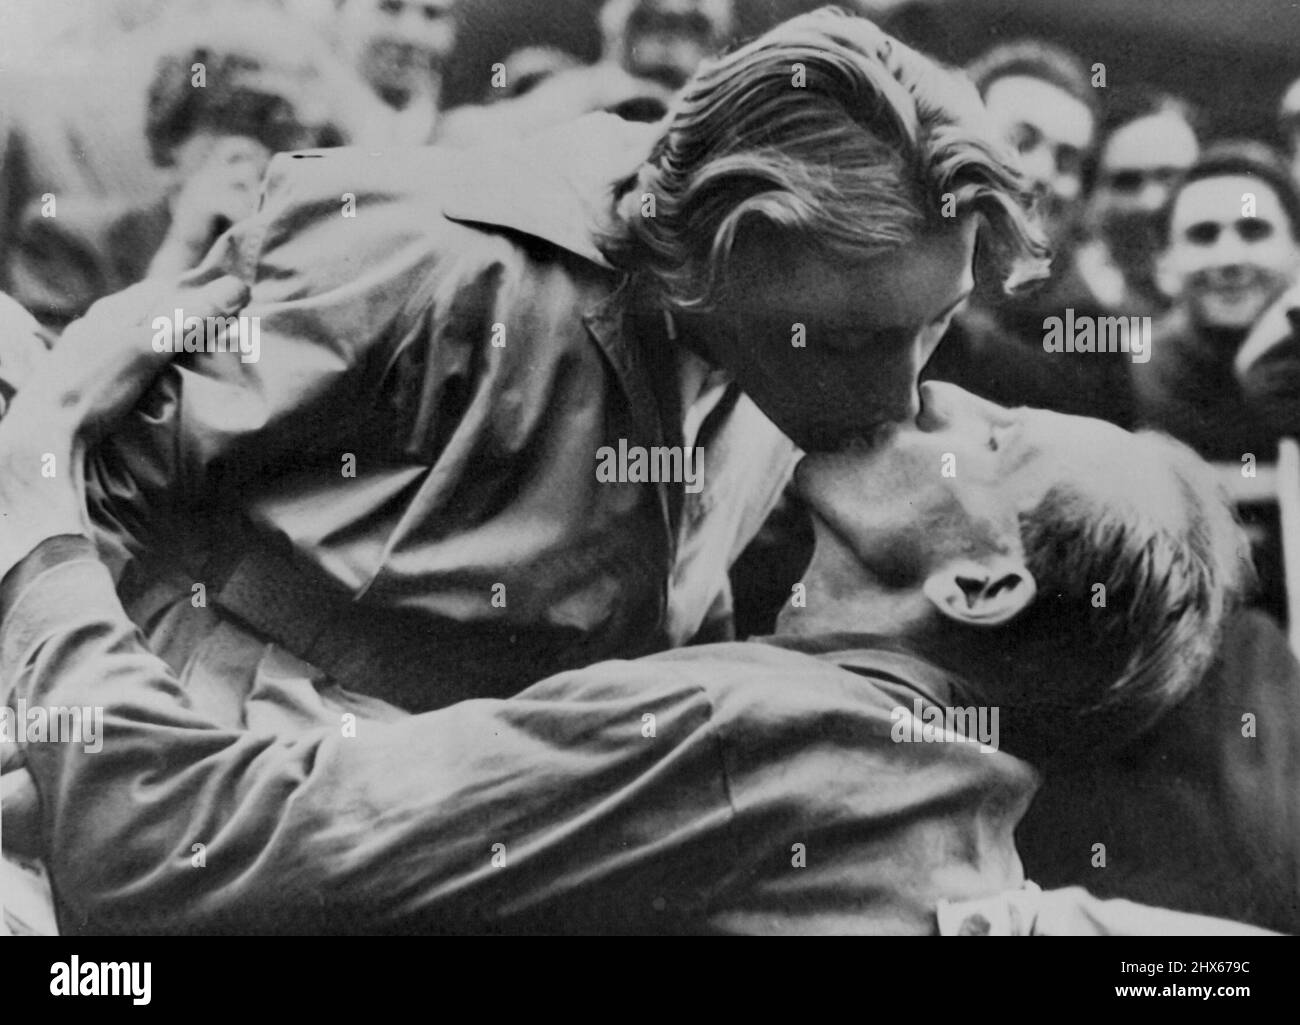 Wife Kisses Zatopek After Marathon Win -- Congratulatory kiss from his wife for Czech Army Major Emil Zatopek after he had won the marathon Olympic Games event to-day. The win marks the first time in history of the Games that an athlete has won all three of the long distance races; marathon, 10,000 and 5,000 metres. Reinaldo Corno of Argentina was second and Gustaf Jansson of Sweden third. Zatopek's wife, Dana Zatopkova, is herself an Olympic-gold medal winner, being victor of the women's javeli Stock Photo